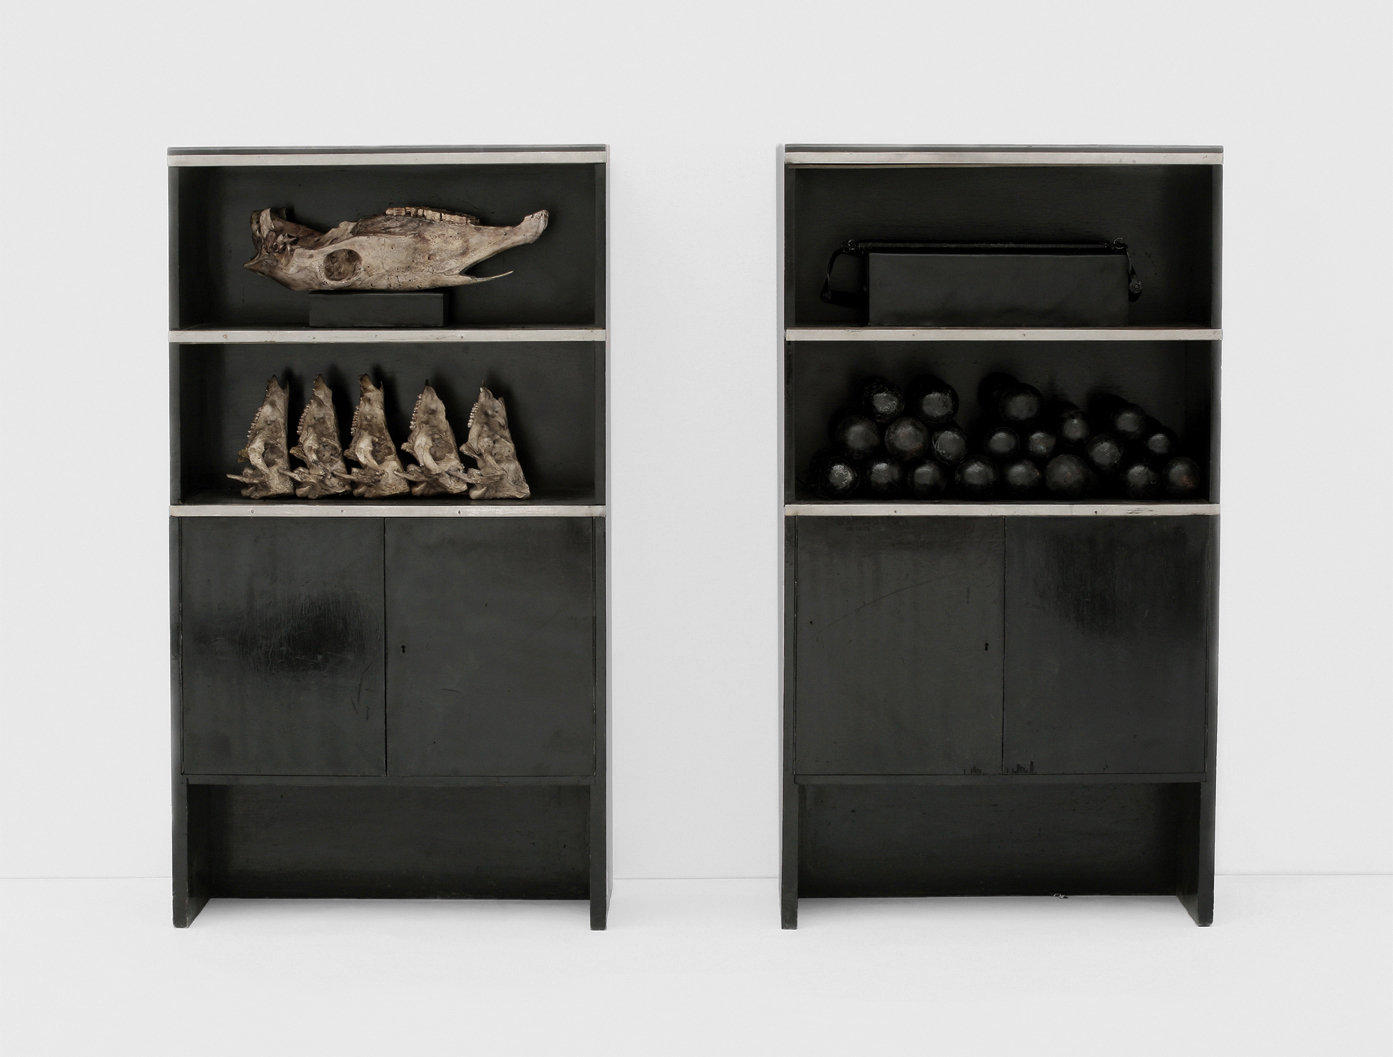 POSSESIA / Primal Elements II /
2010 / each piece 80 x 145 x 35 cm / pieces of furniture, glass, animal
skulls, weights, leather